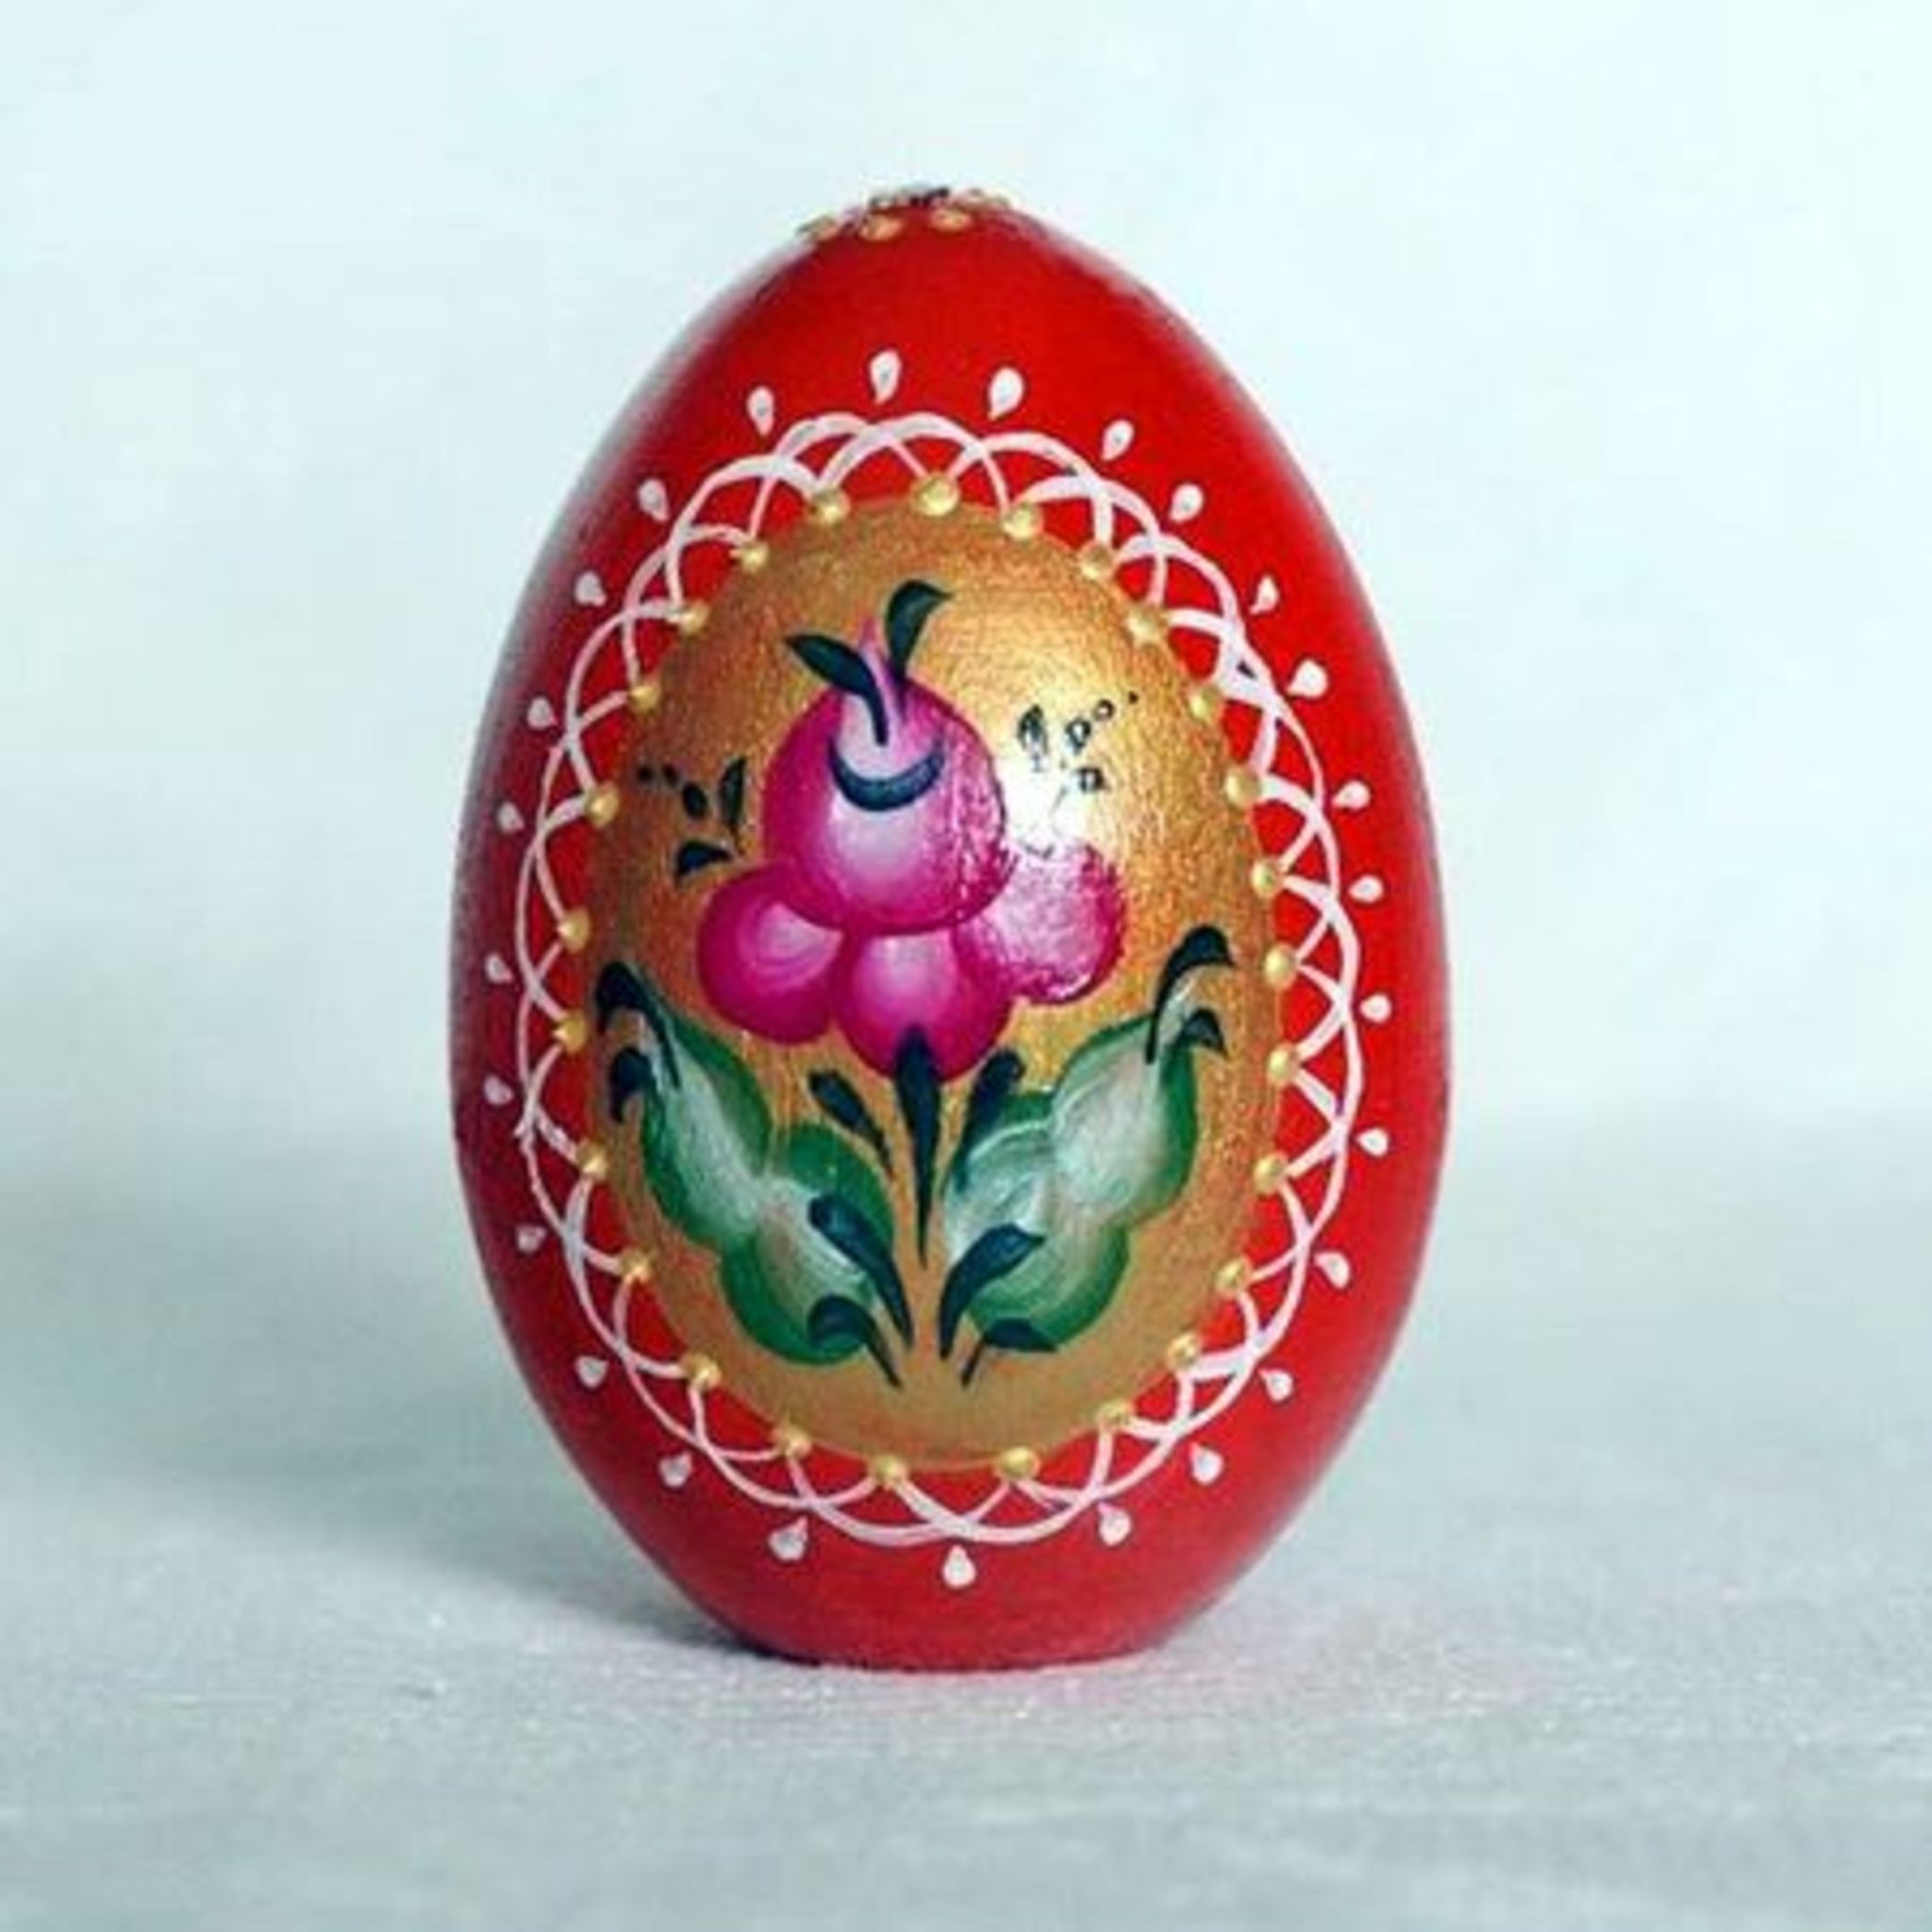 Master class on making Easter souvenirs